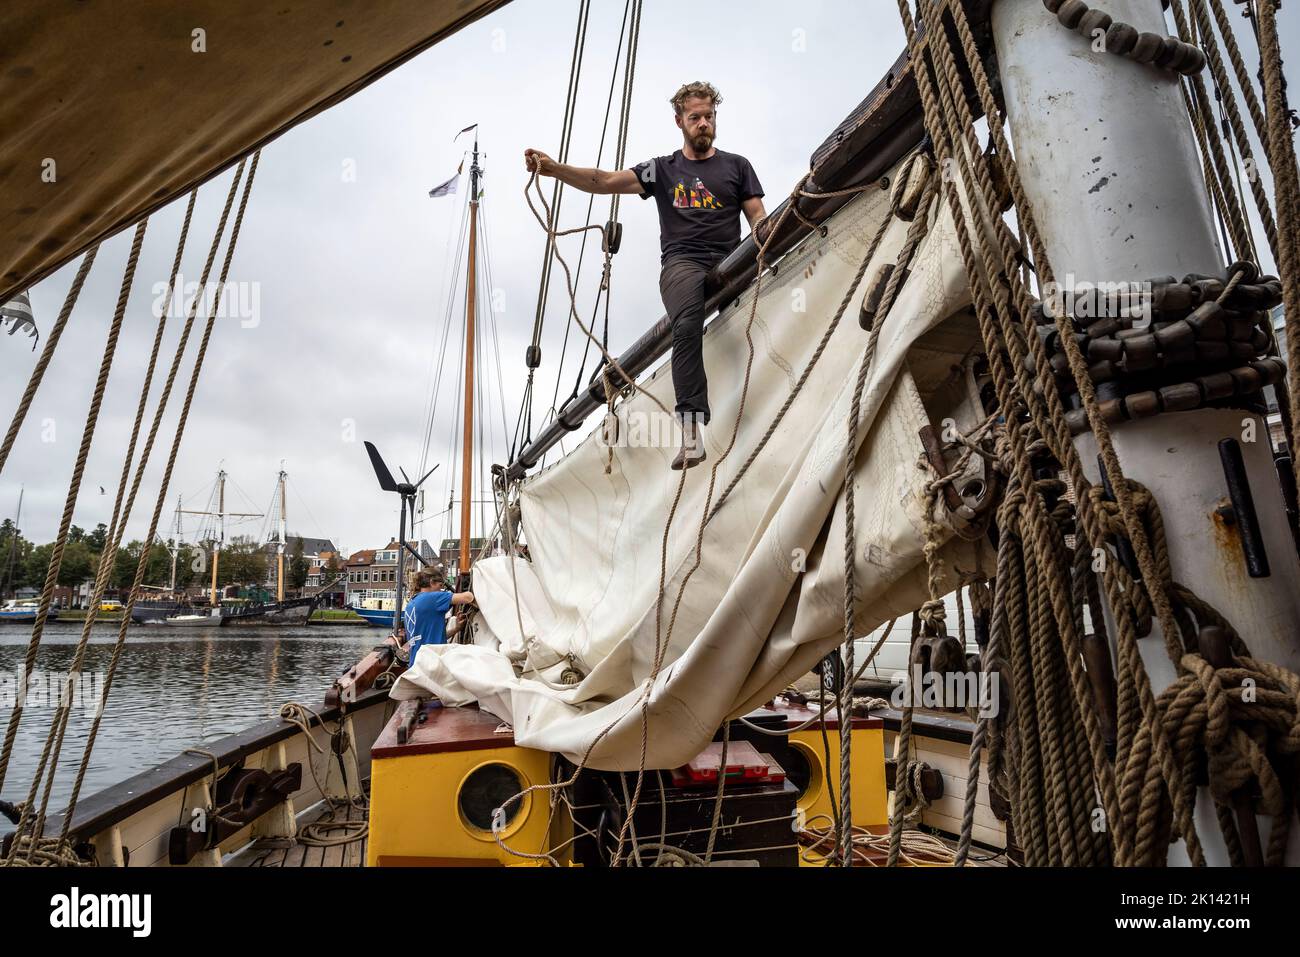 The cargo sailing vessel 'Tres Hombres' of the shipping company 'Fairtransport' has moored in its home port in Den Helder Netherlands and hoists the sails. Here it is being prepared by the crew for its next voyage. The schooner 'Tres Hombres' transports goods such as wine, coffee, chocolate and rum from the Caribbean across the Atlantic to Europe in a completely climate-neutral manner. Stock Photo